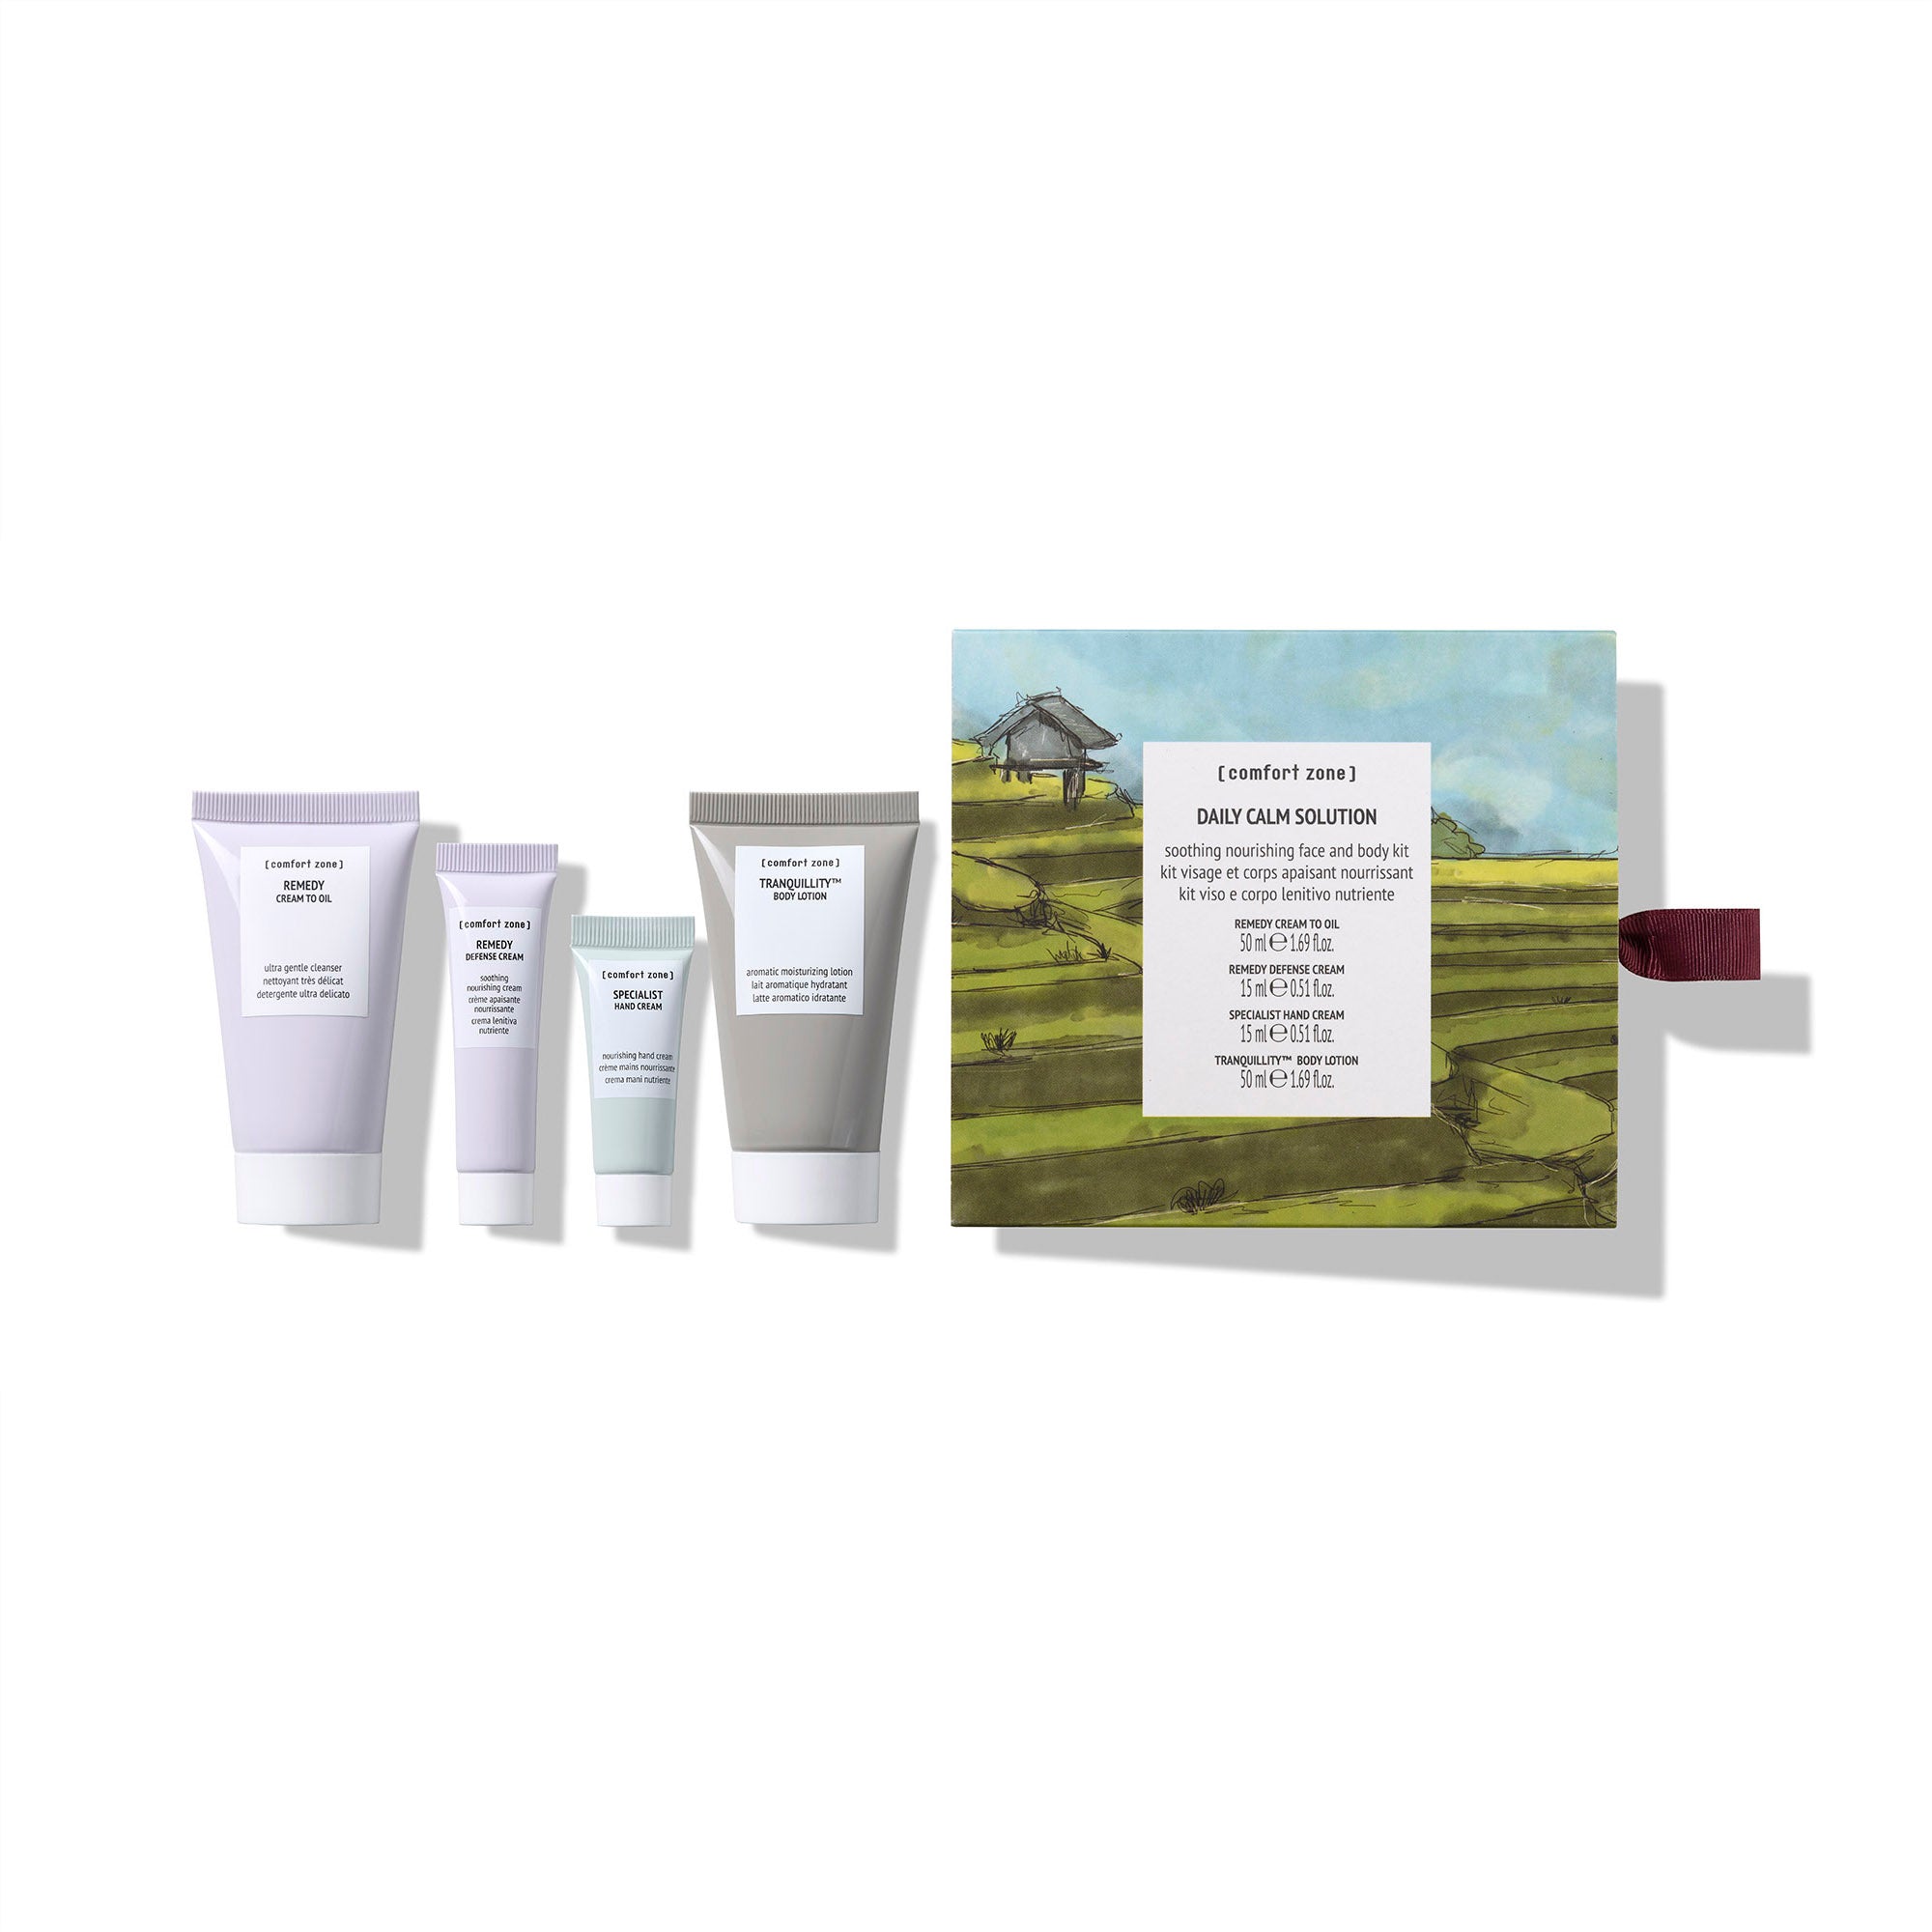 Comfort Zone: KIT DAILY CALM SOLUTION Soothing nourishing face and body kit-
